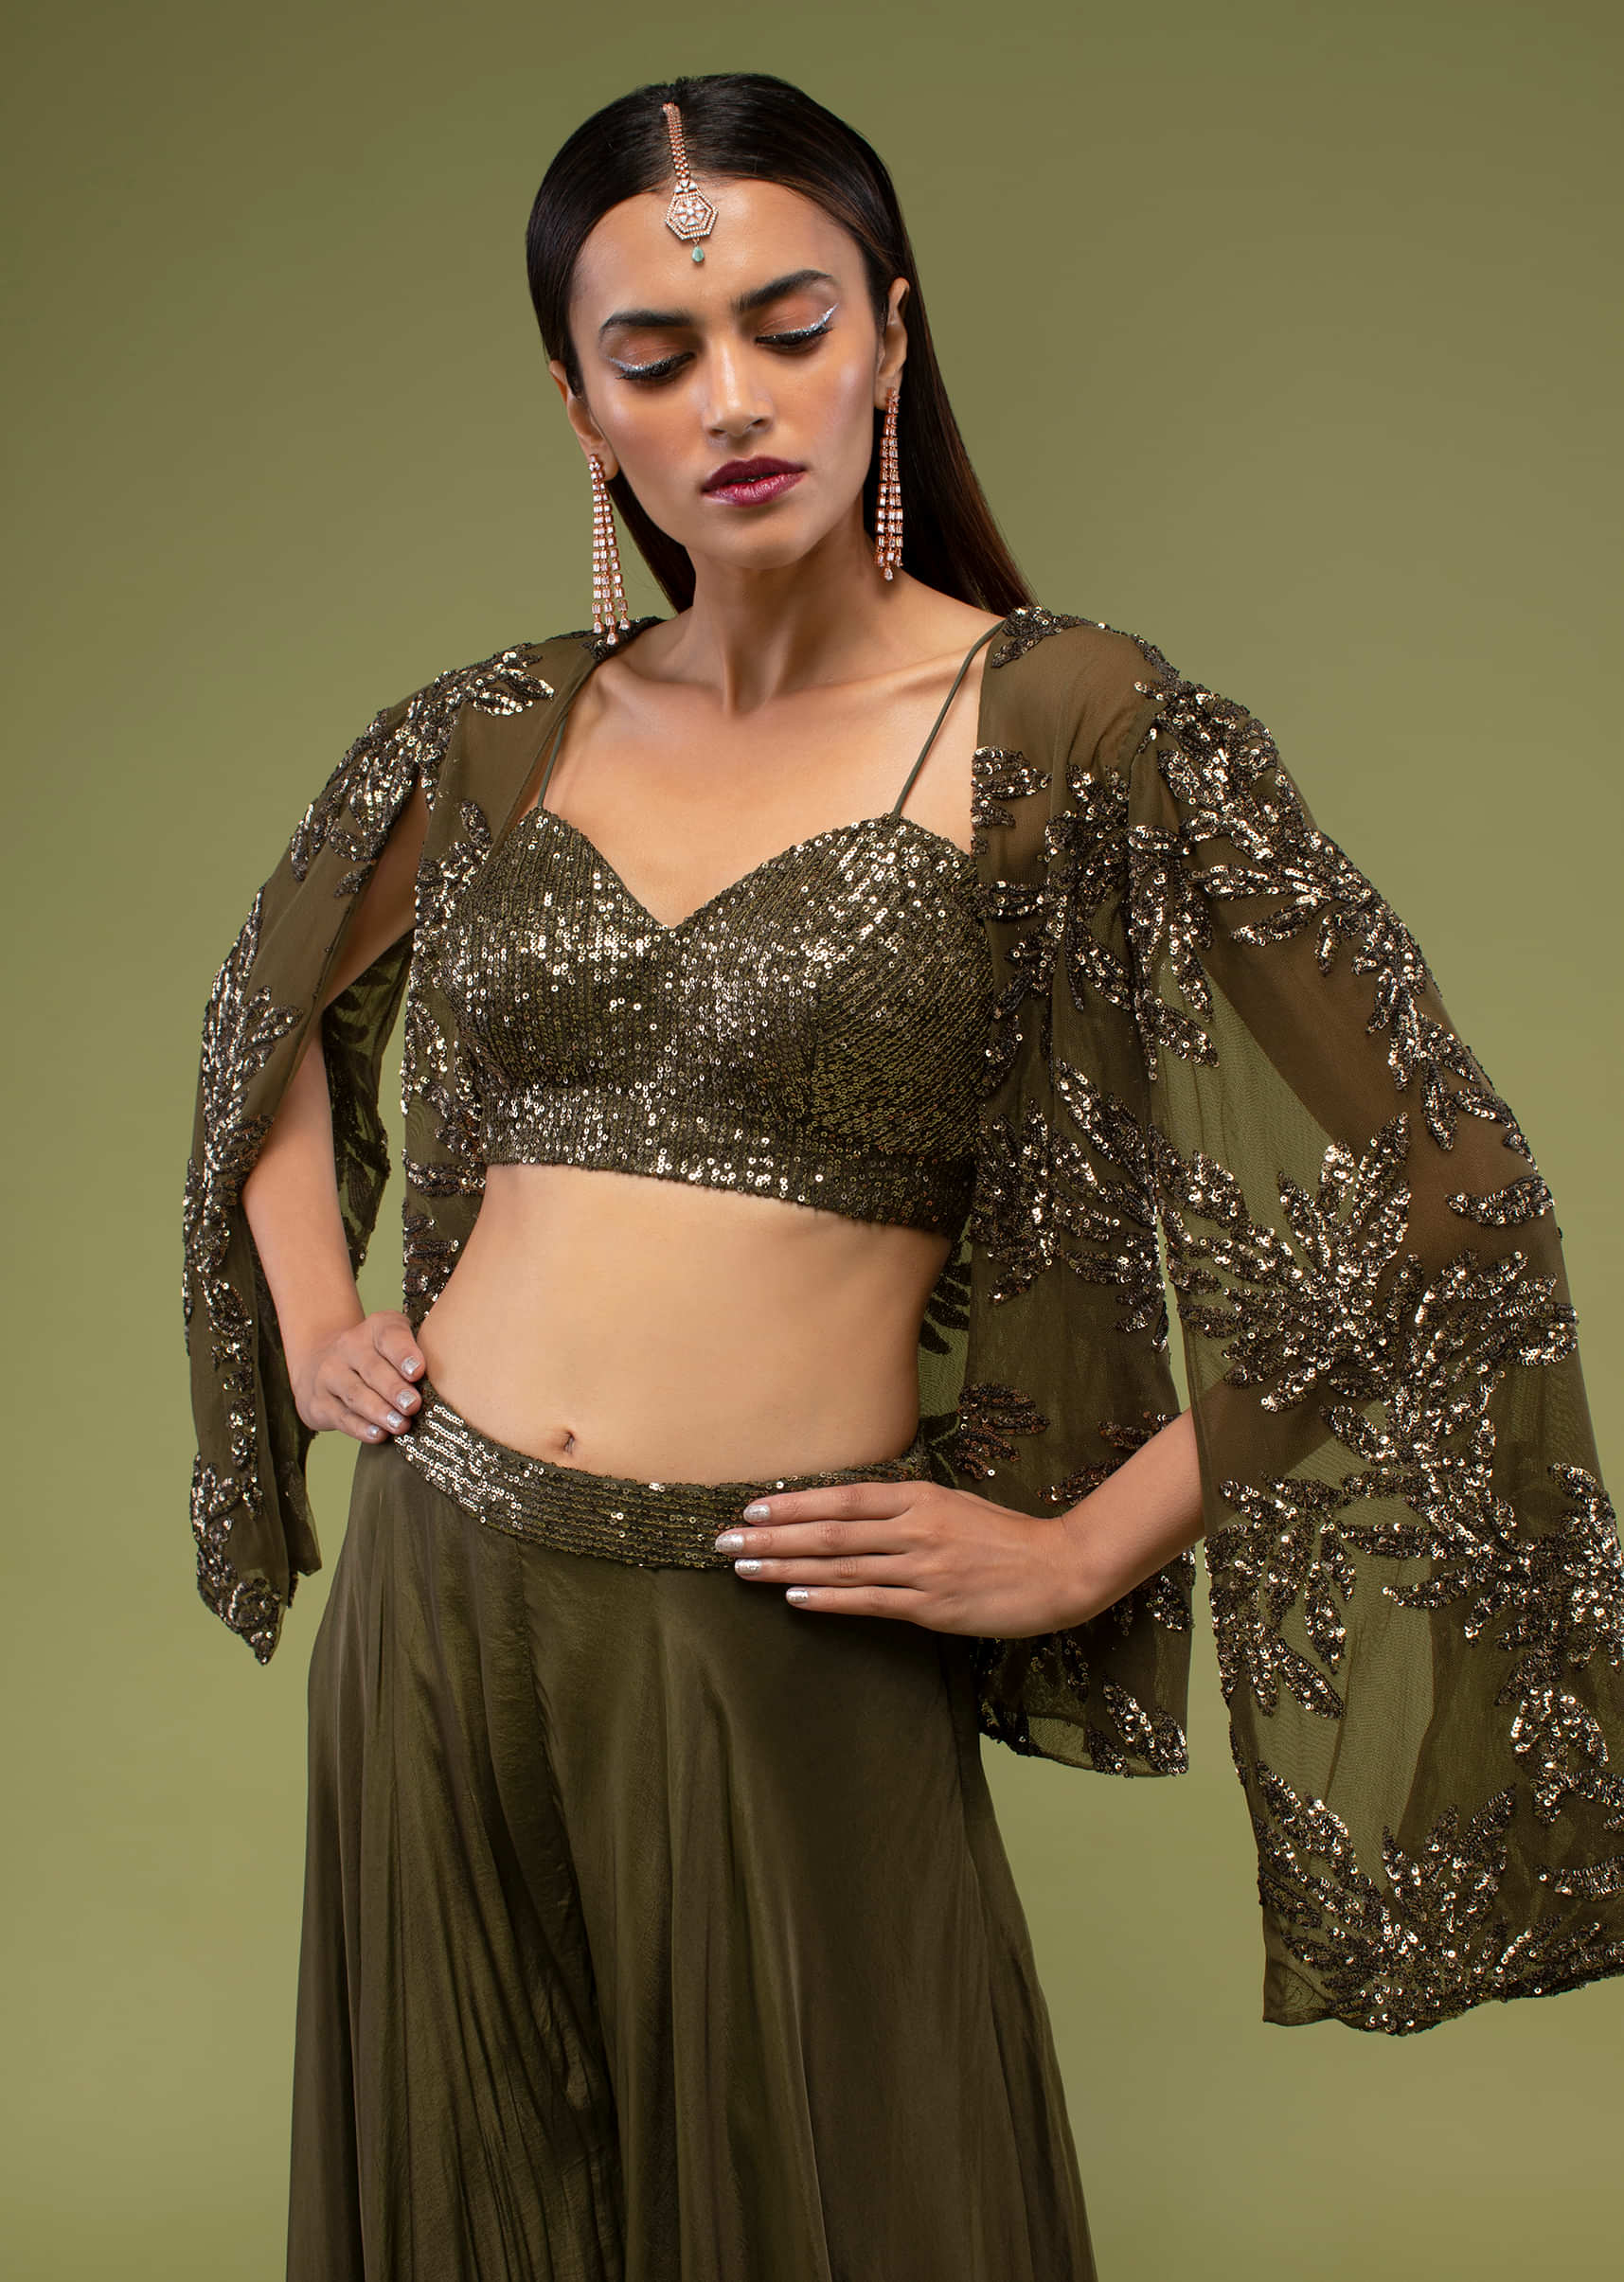 Military Olive Green Palazzo And A Crop Top Set, Paired With A Cape With Sequins Embroidery On It